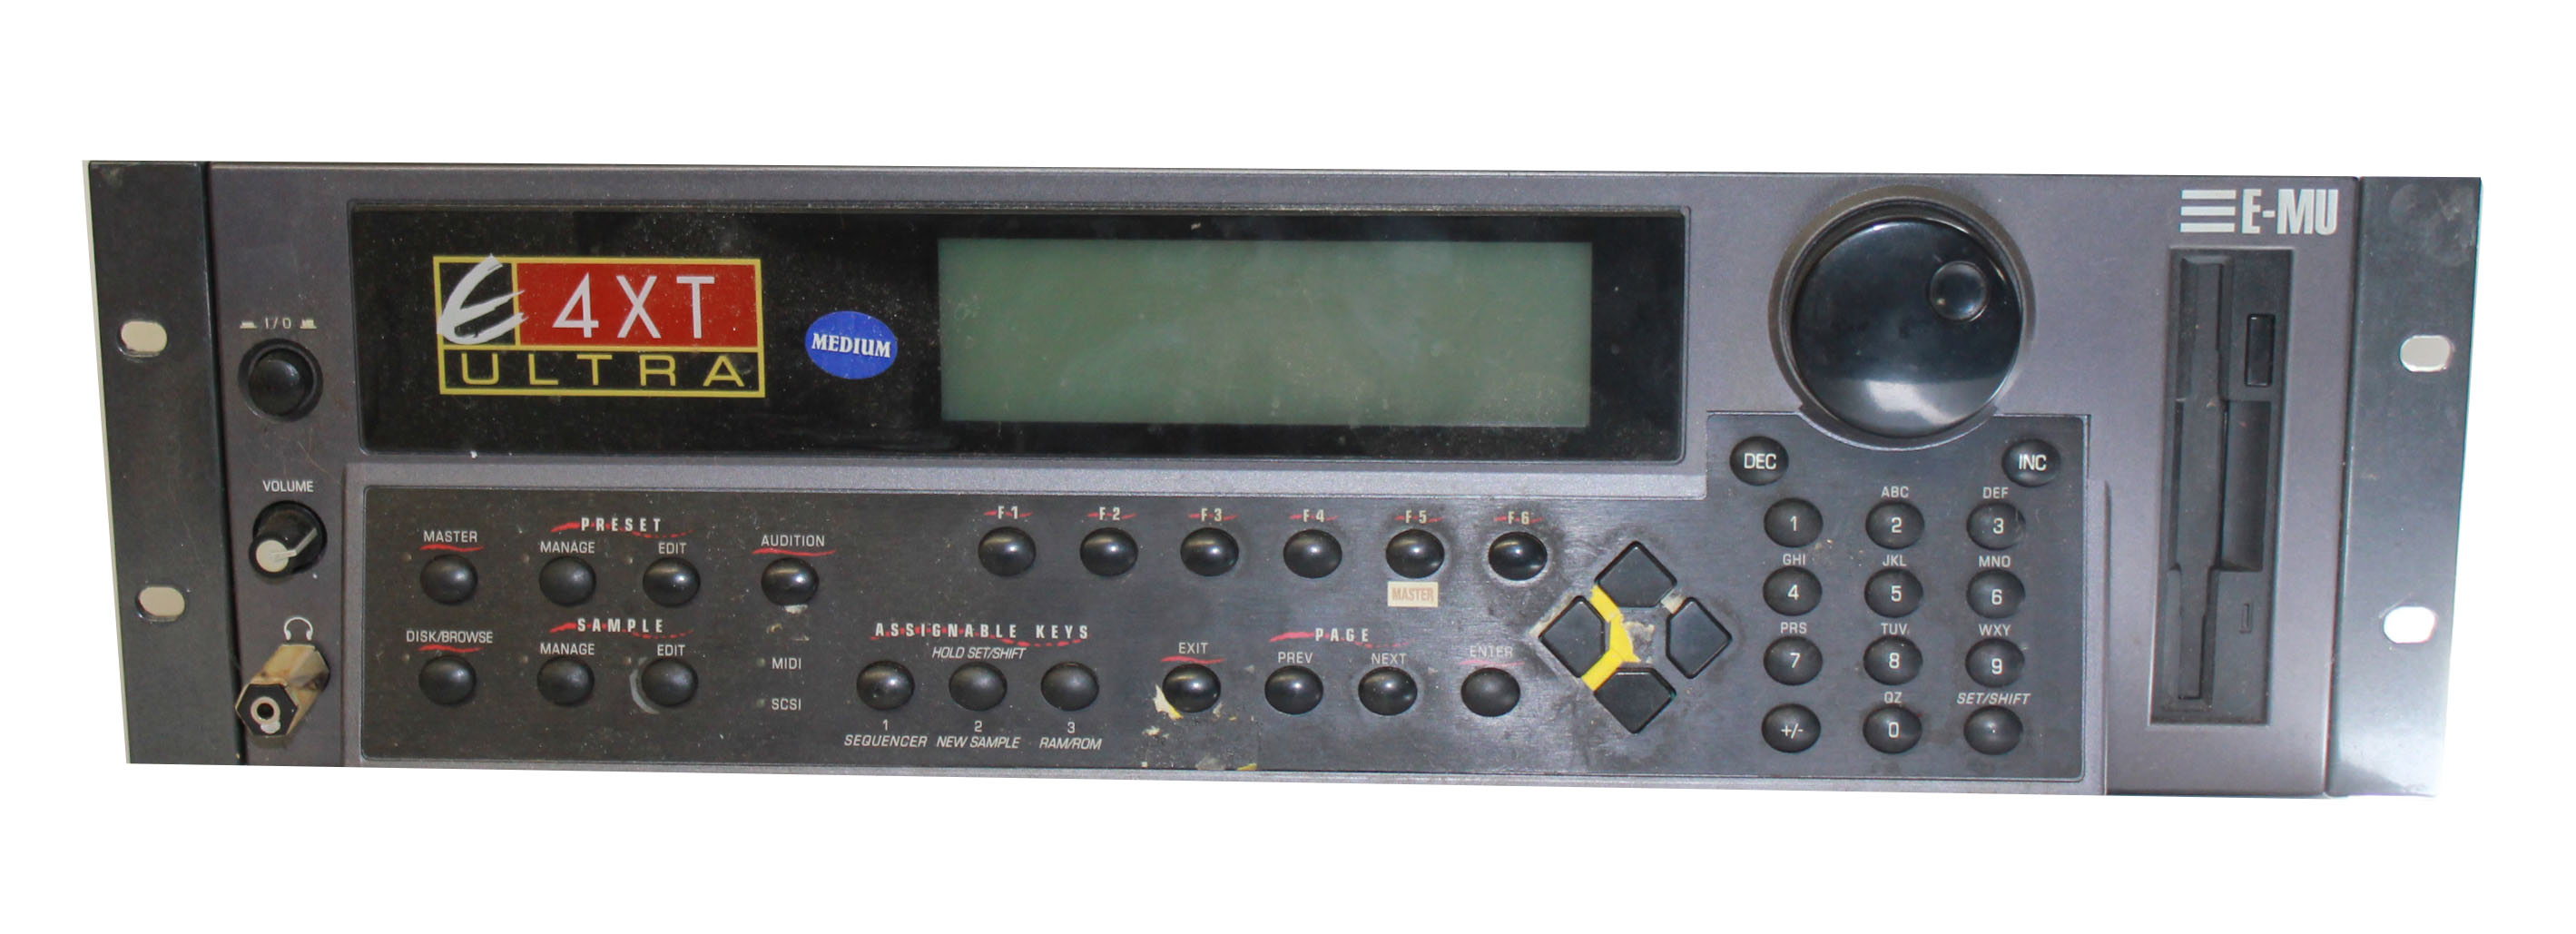 AN E-MU E4XT VINTAGE SAMPLER With floppy disc port and assignable key features.